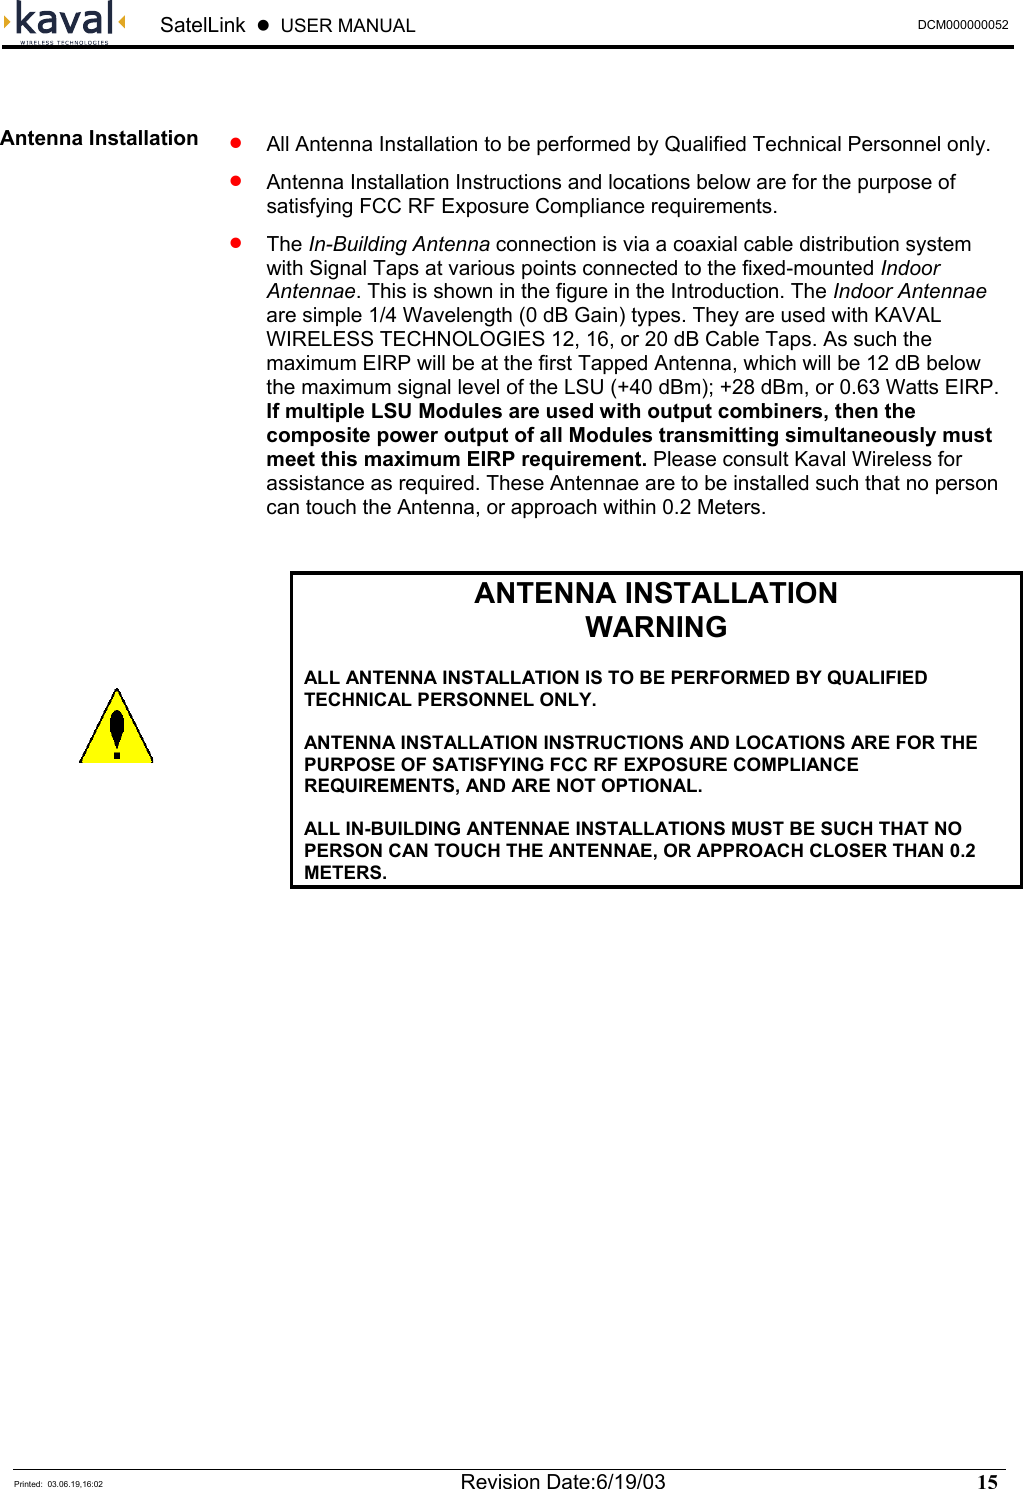  SatelLink  z  USER MANUAL  DCM000000052  Printed:  03.06.19,16:02  Revision Date:6/19/03   15    •   All Antenna Installation to be performed by Qualified Technical Personnel only. •   Antenna Installation Instructions and locations below are for the purpose of satisfying FCC RF Exposure Compliance requirements. •  The In-Building Antenna connection is via a coaxial cable distribution system with Signal Taps at various points connected to the fixed-mounted Indoor Antennae. This is shown in the figure in the Introduction. The Indoor Antennae are simple 1/4 Wavelength (0 dB Gain) types. They are used with KAVAL WIRELESS TECHNOLOGIES 12, 16, or 20 dB Cable Taps. As such the maximum EIRP will be at the first Tapped Antenna, which will be 12 dB below the maximum signal level of the LSU (+40 dBm); +28 dBm, or 0.63 Watts EIRP. If multiple LSU Modules are used with output combiners, then the composite power output of all Modules transmitting simultaneously must meet this maximum EIRP requirement. Please consult Kaval Wireless for assistance as required. These Antennae are to be installed such that no person can touch the Antenna, or approach within 0.2 Meters.   ANTENNA INSTALLATION WARNING  ALL ANTENNA INSTALLATION IS TO BE PERFORMED BY QUALIFIED TECHNICAL PERSONNEL ONLY.  ANTENNA INSTALLATION INSTRUCTIONS AND LOCATIONS ARE FOR THE PURPOSE OF SATISFYING FCC RF EXPOSURE COMPLIANCE REQUIREMENTS, AND ARE NOT OPTIONAL.  ALL IN-BUILDING ANTENNAE INSTALLATIONS MUST BE SUCH THAT NO PERSON CAN TOUCH THE ANTENNAE, OR APPROACH CLOSER THAN 0.2 METERS.   Antenna Installation  